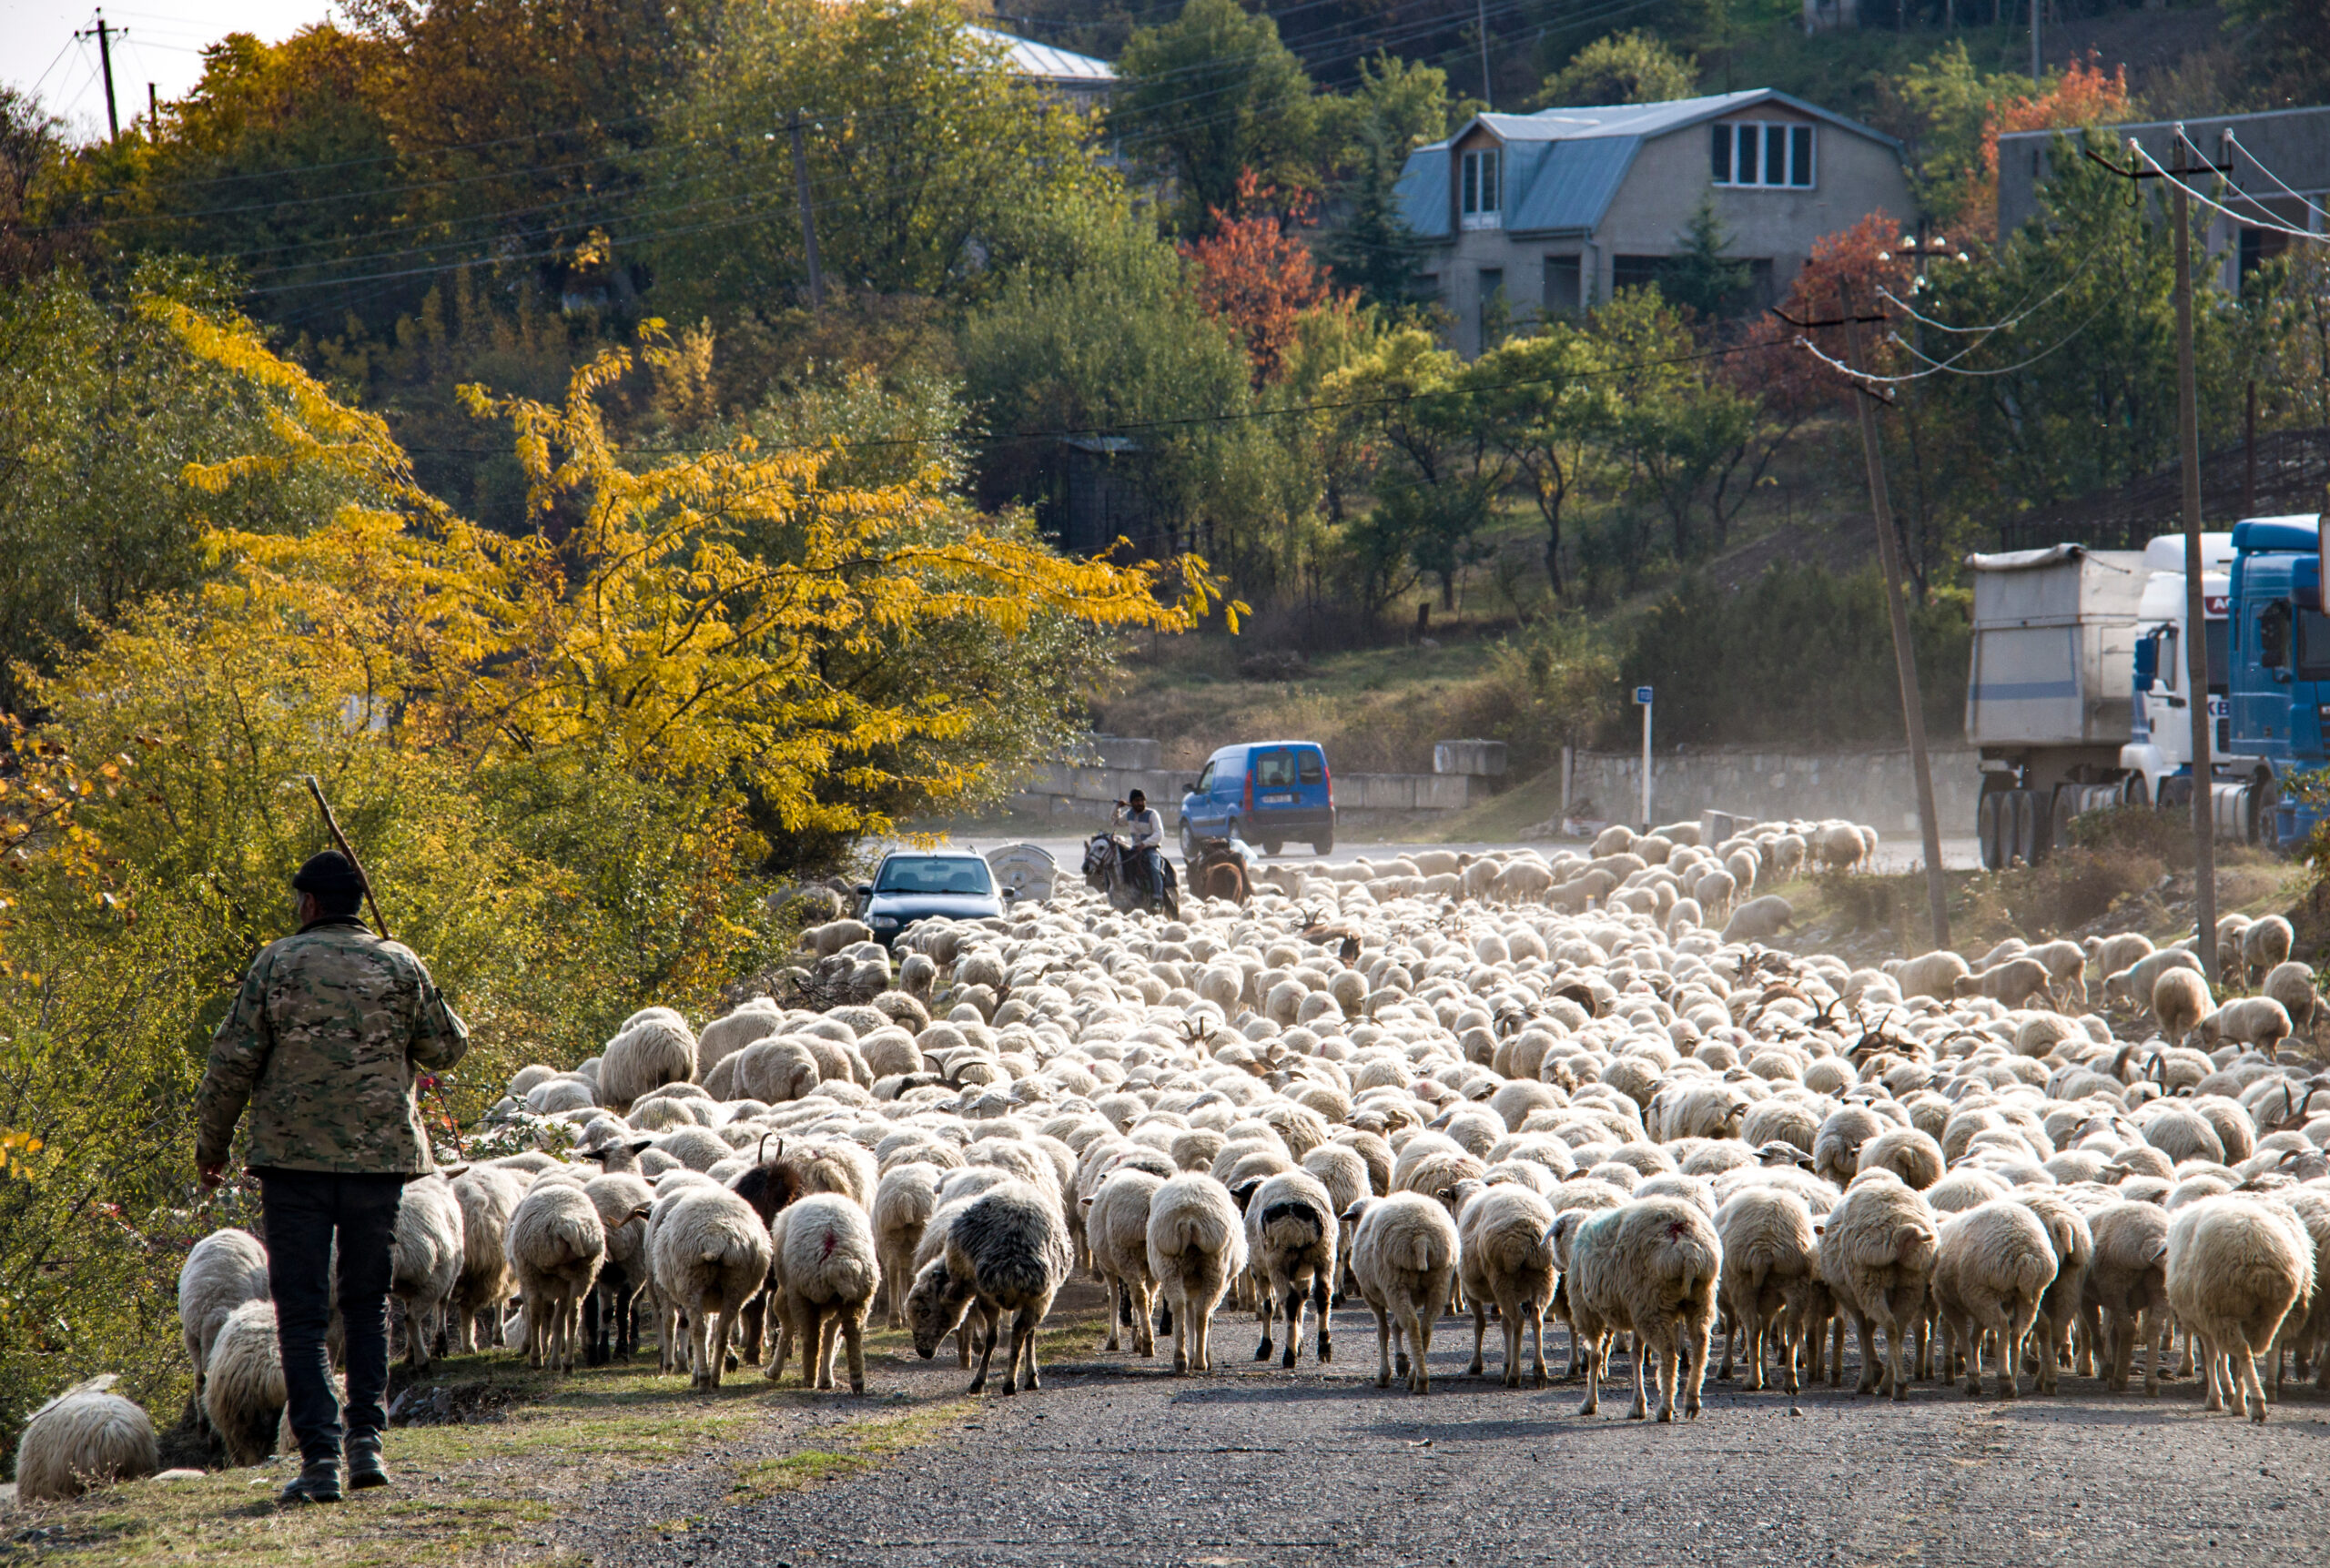 production-services-and-filming-in-georgia-via-swixer-flock-of-sheep-along-the-road